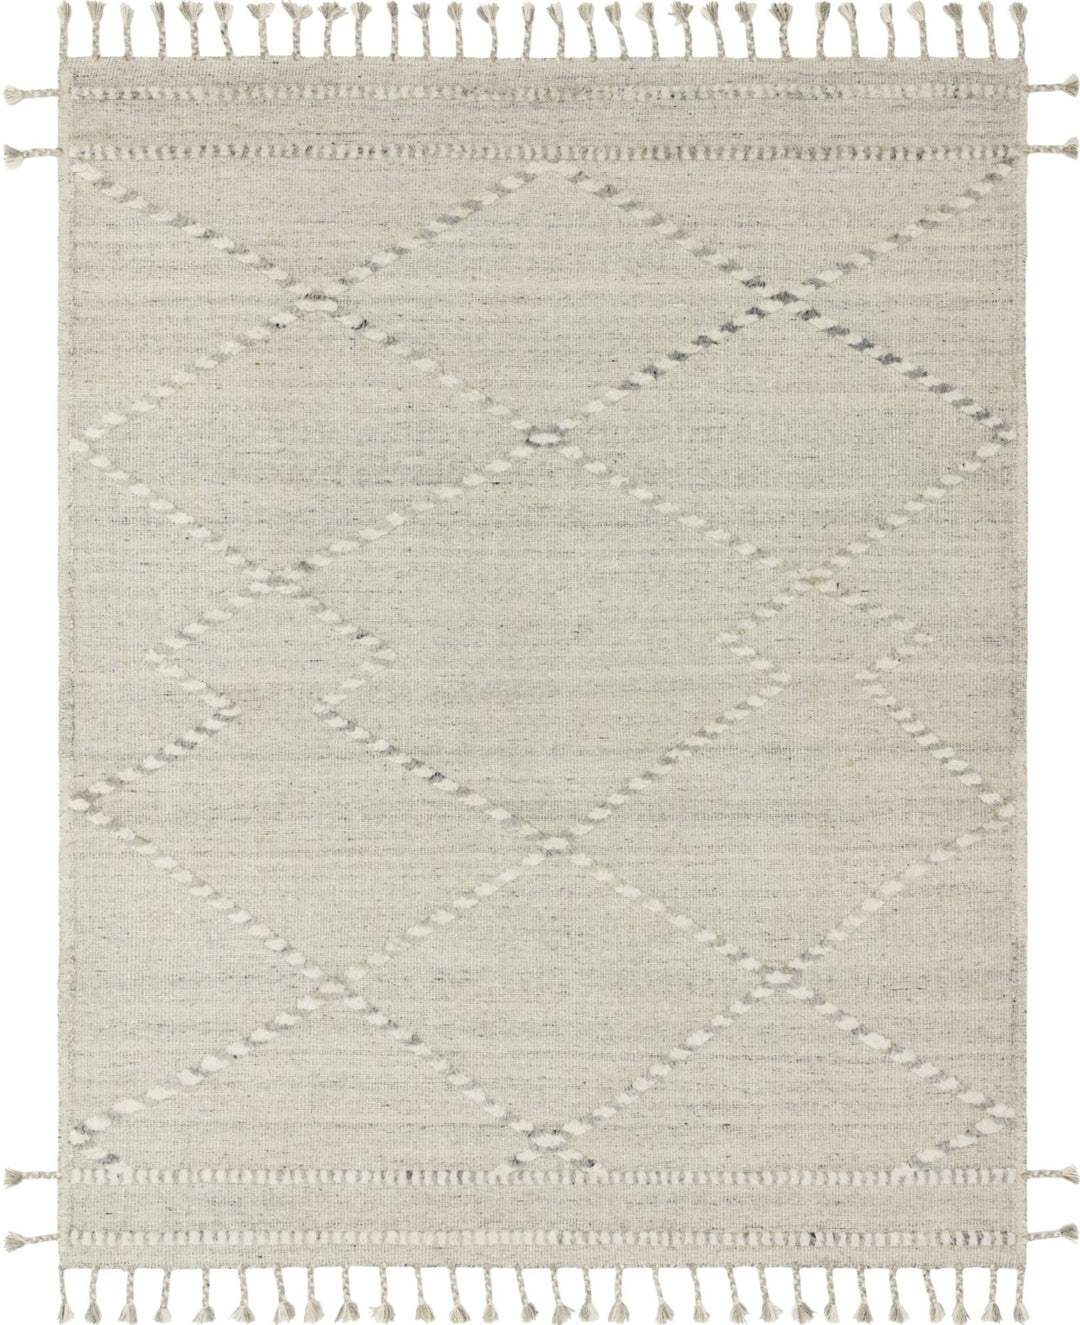 IMAN 03 HAND-KNOTTED WOOL RUG: IVORY, SILVER